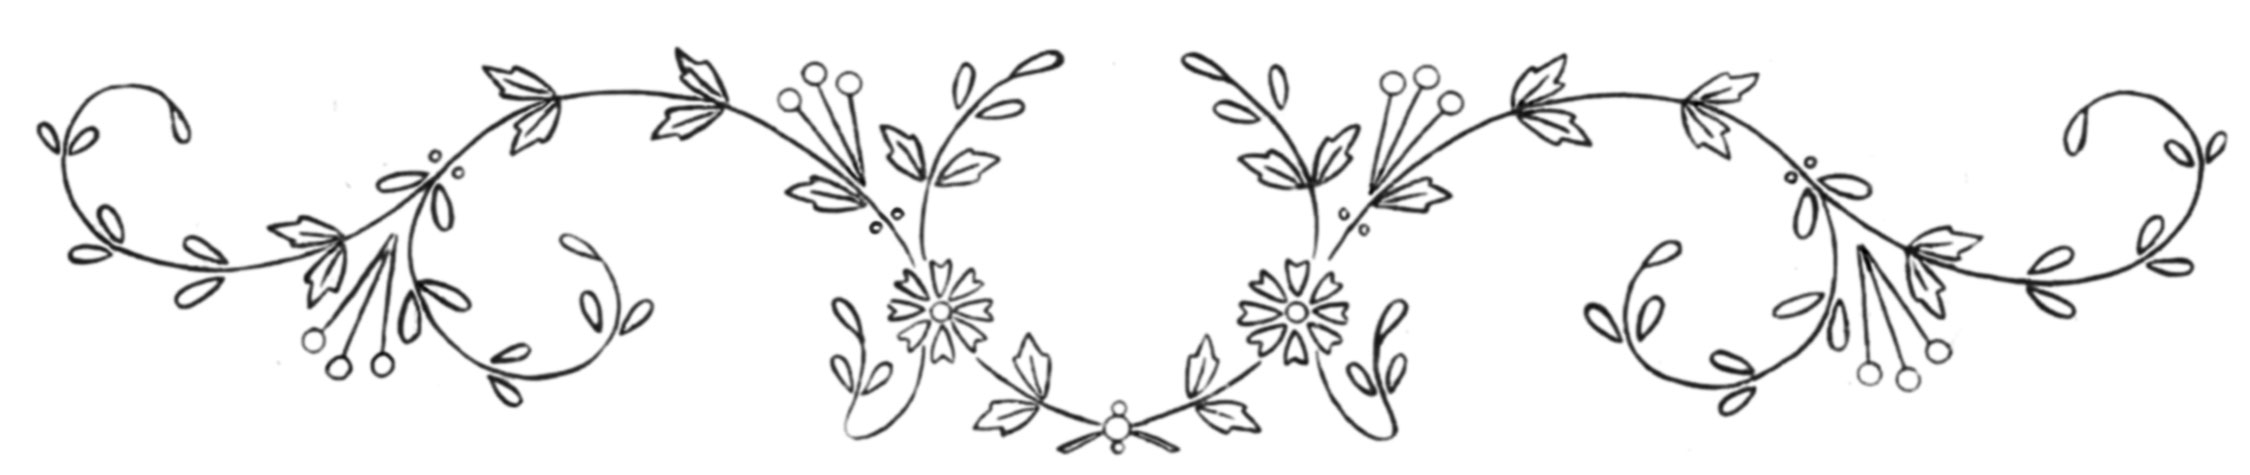 Free Embroidery Designs Patterns Free Pattern Friday Embroidery Designs For Pillowcases Q Is For